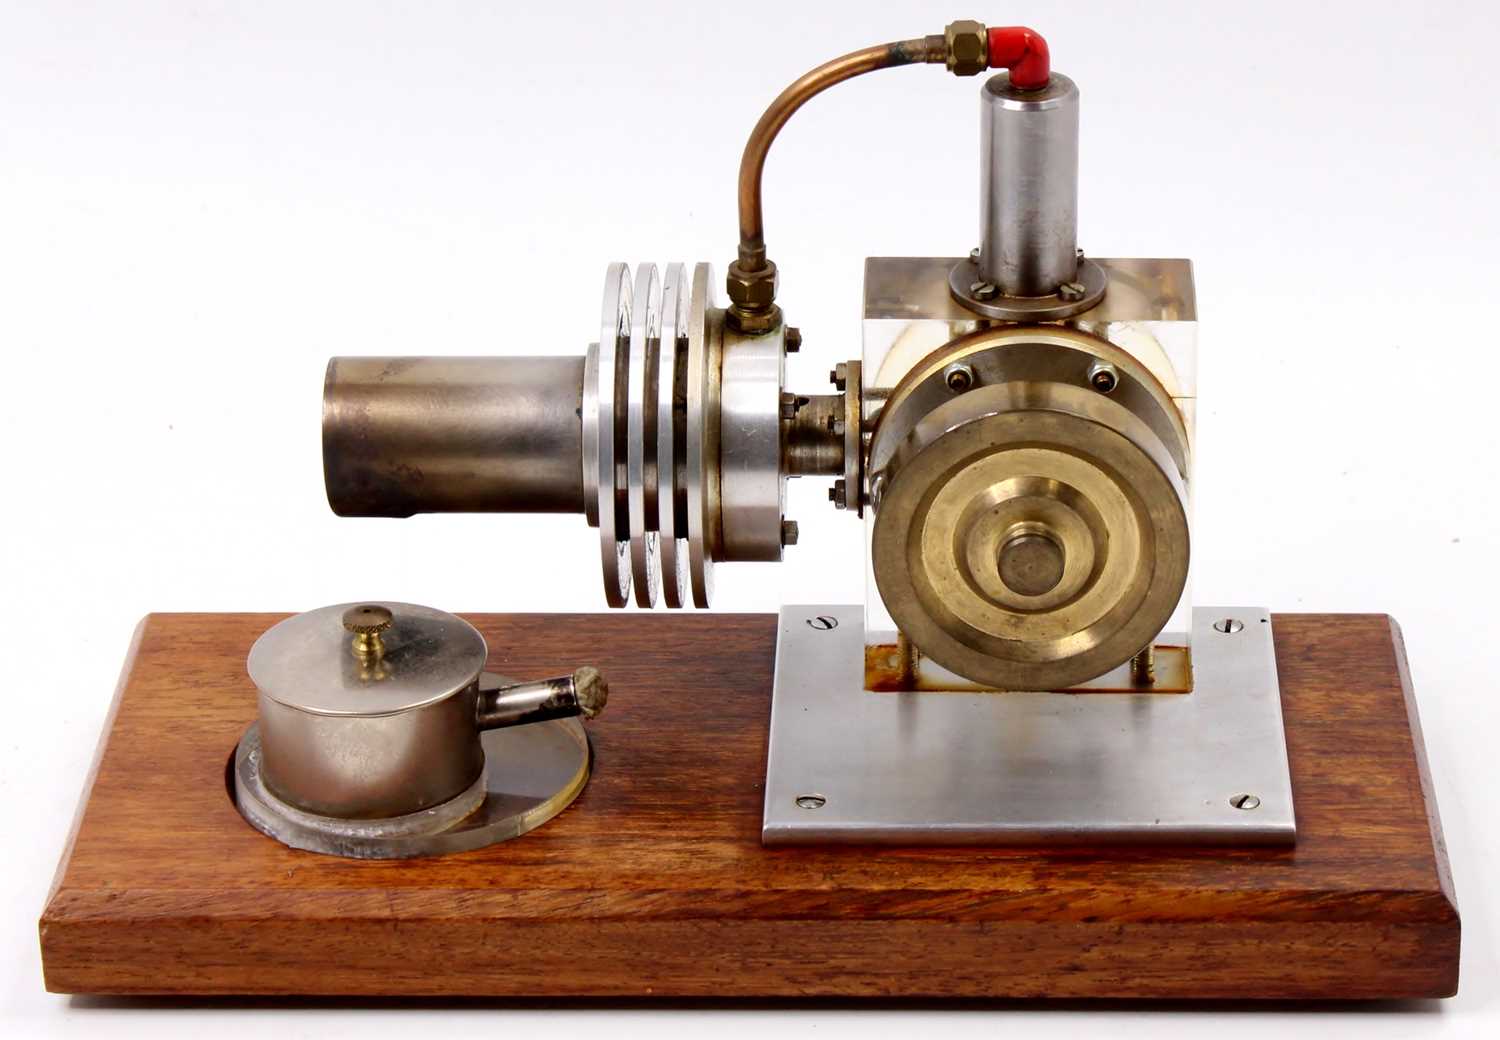 Engineers Scratcbuilt model of a single-cylinder hot air engine, comprising of large horizontal heat